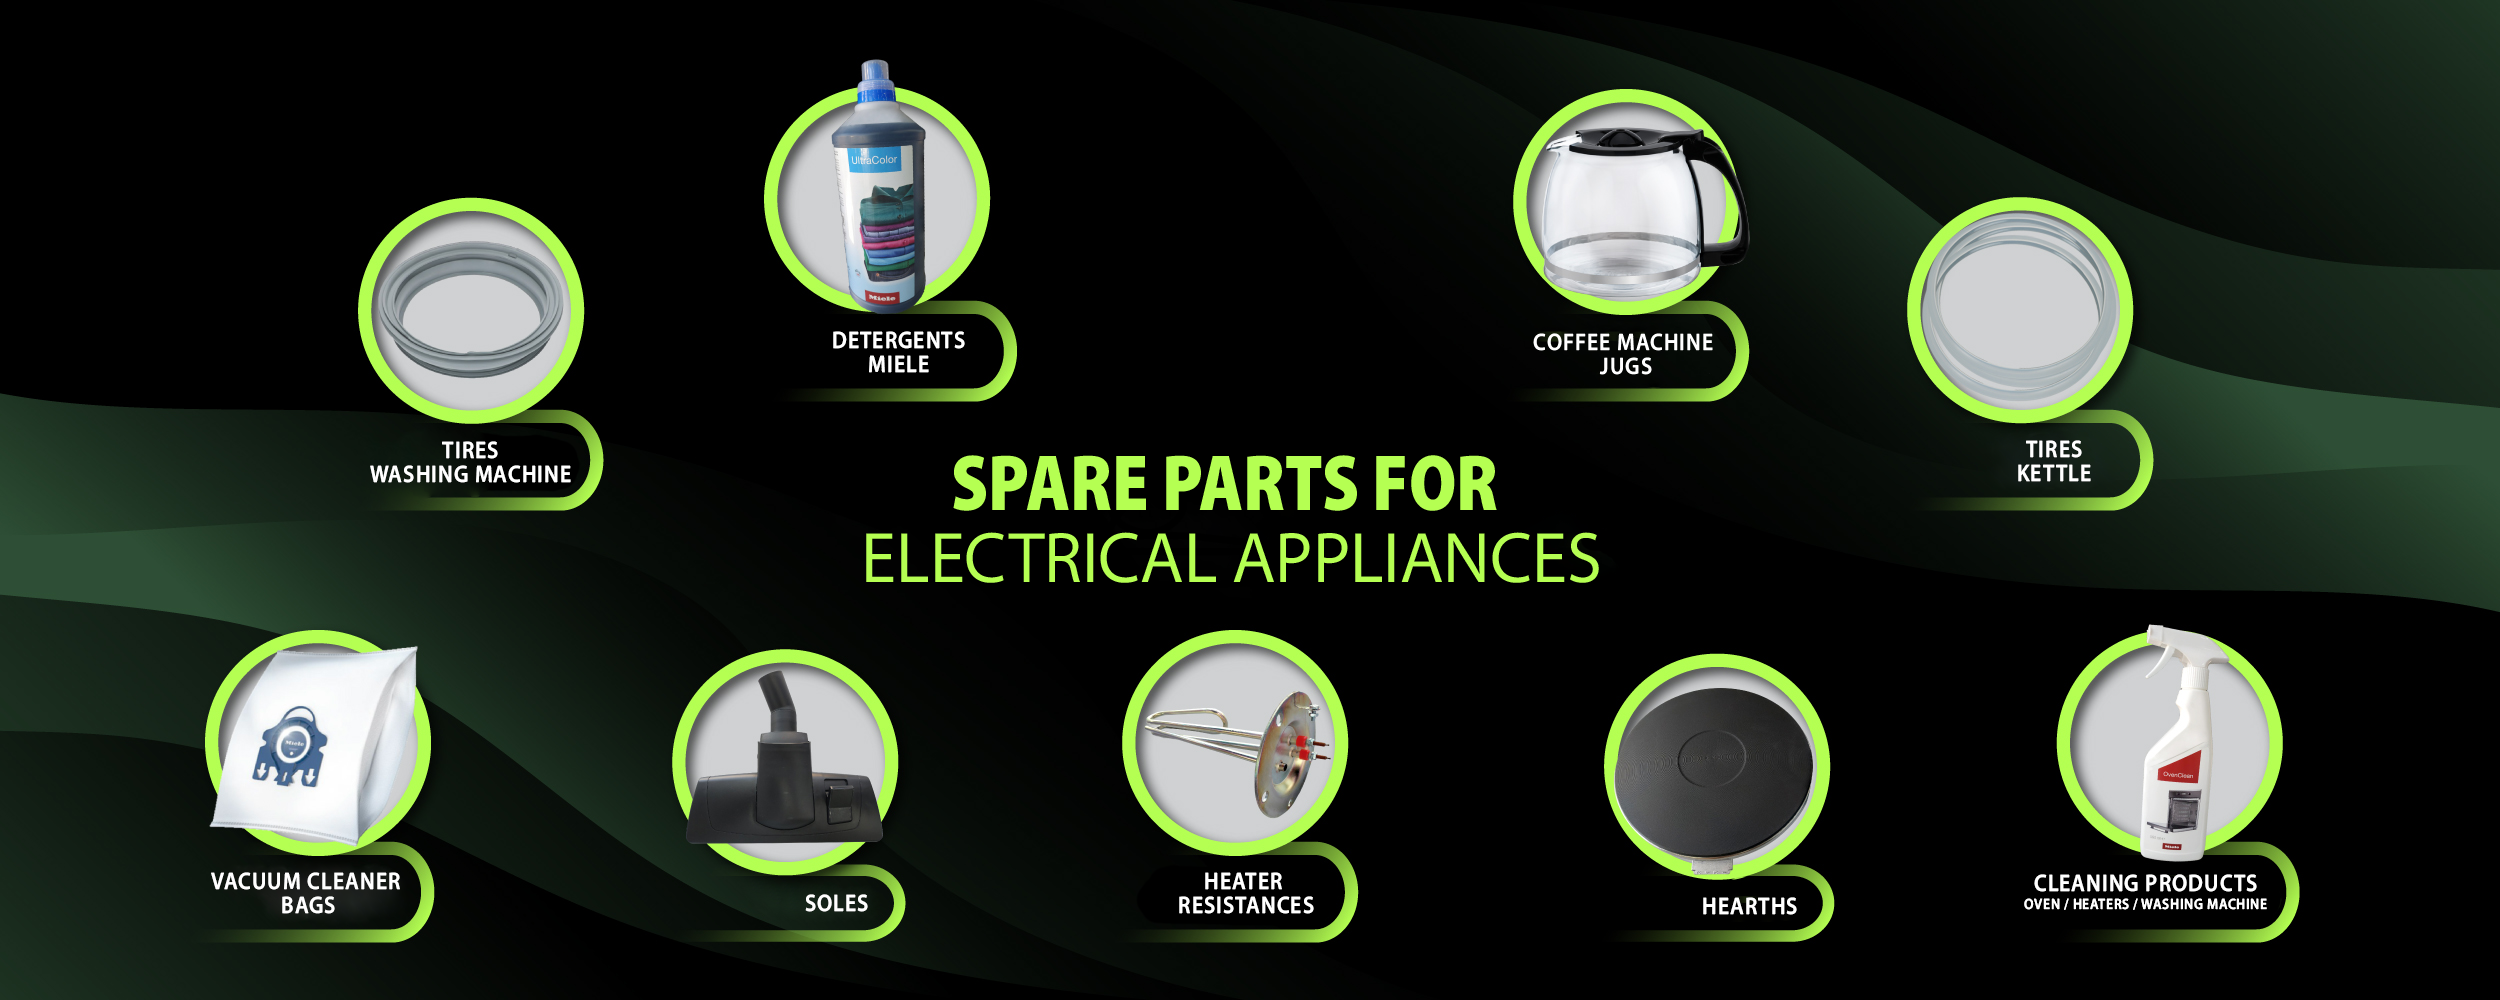 Spare Parts for Electrical Appliances